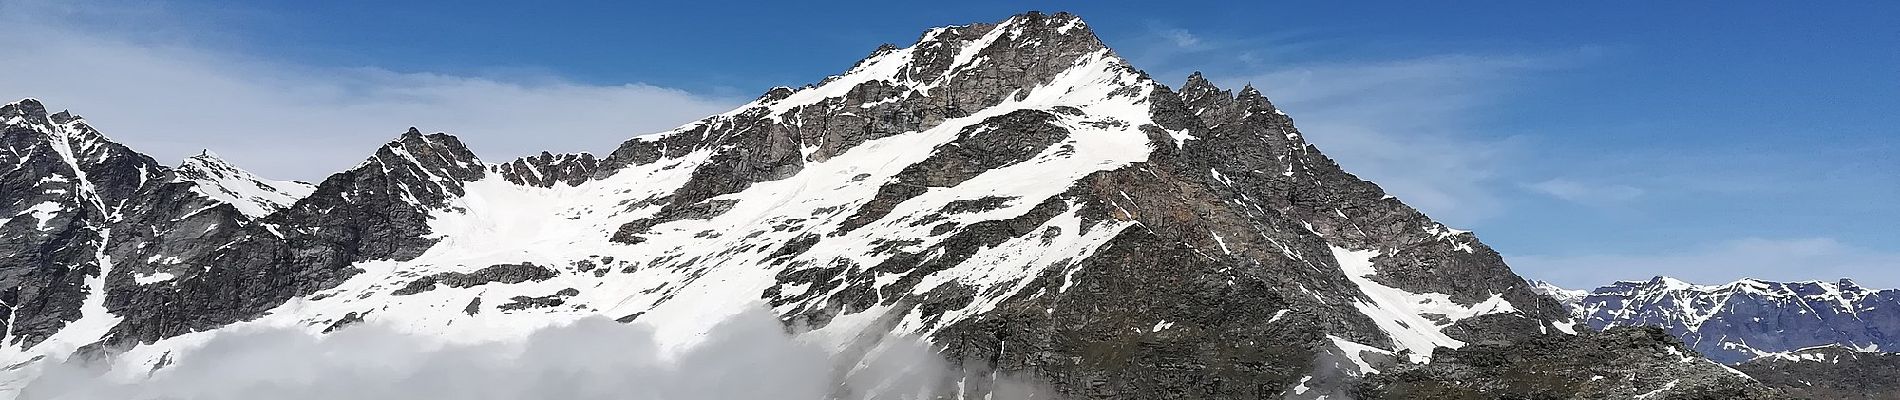 Tocht Te voet Ceresole Reale - IT-521 - Photo